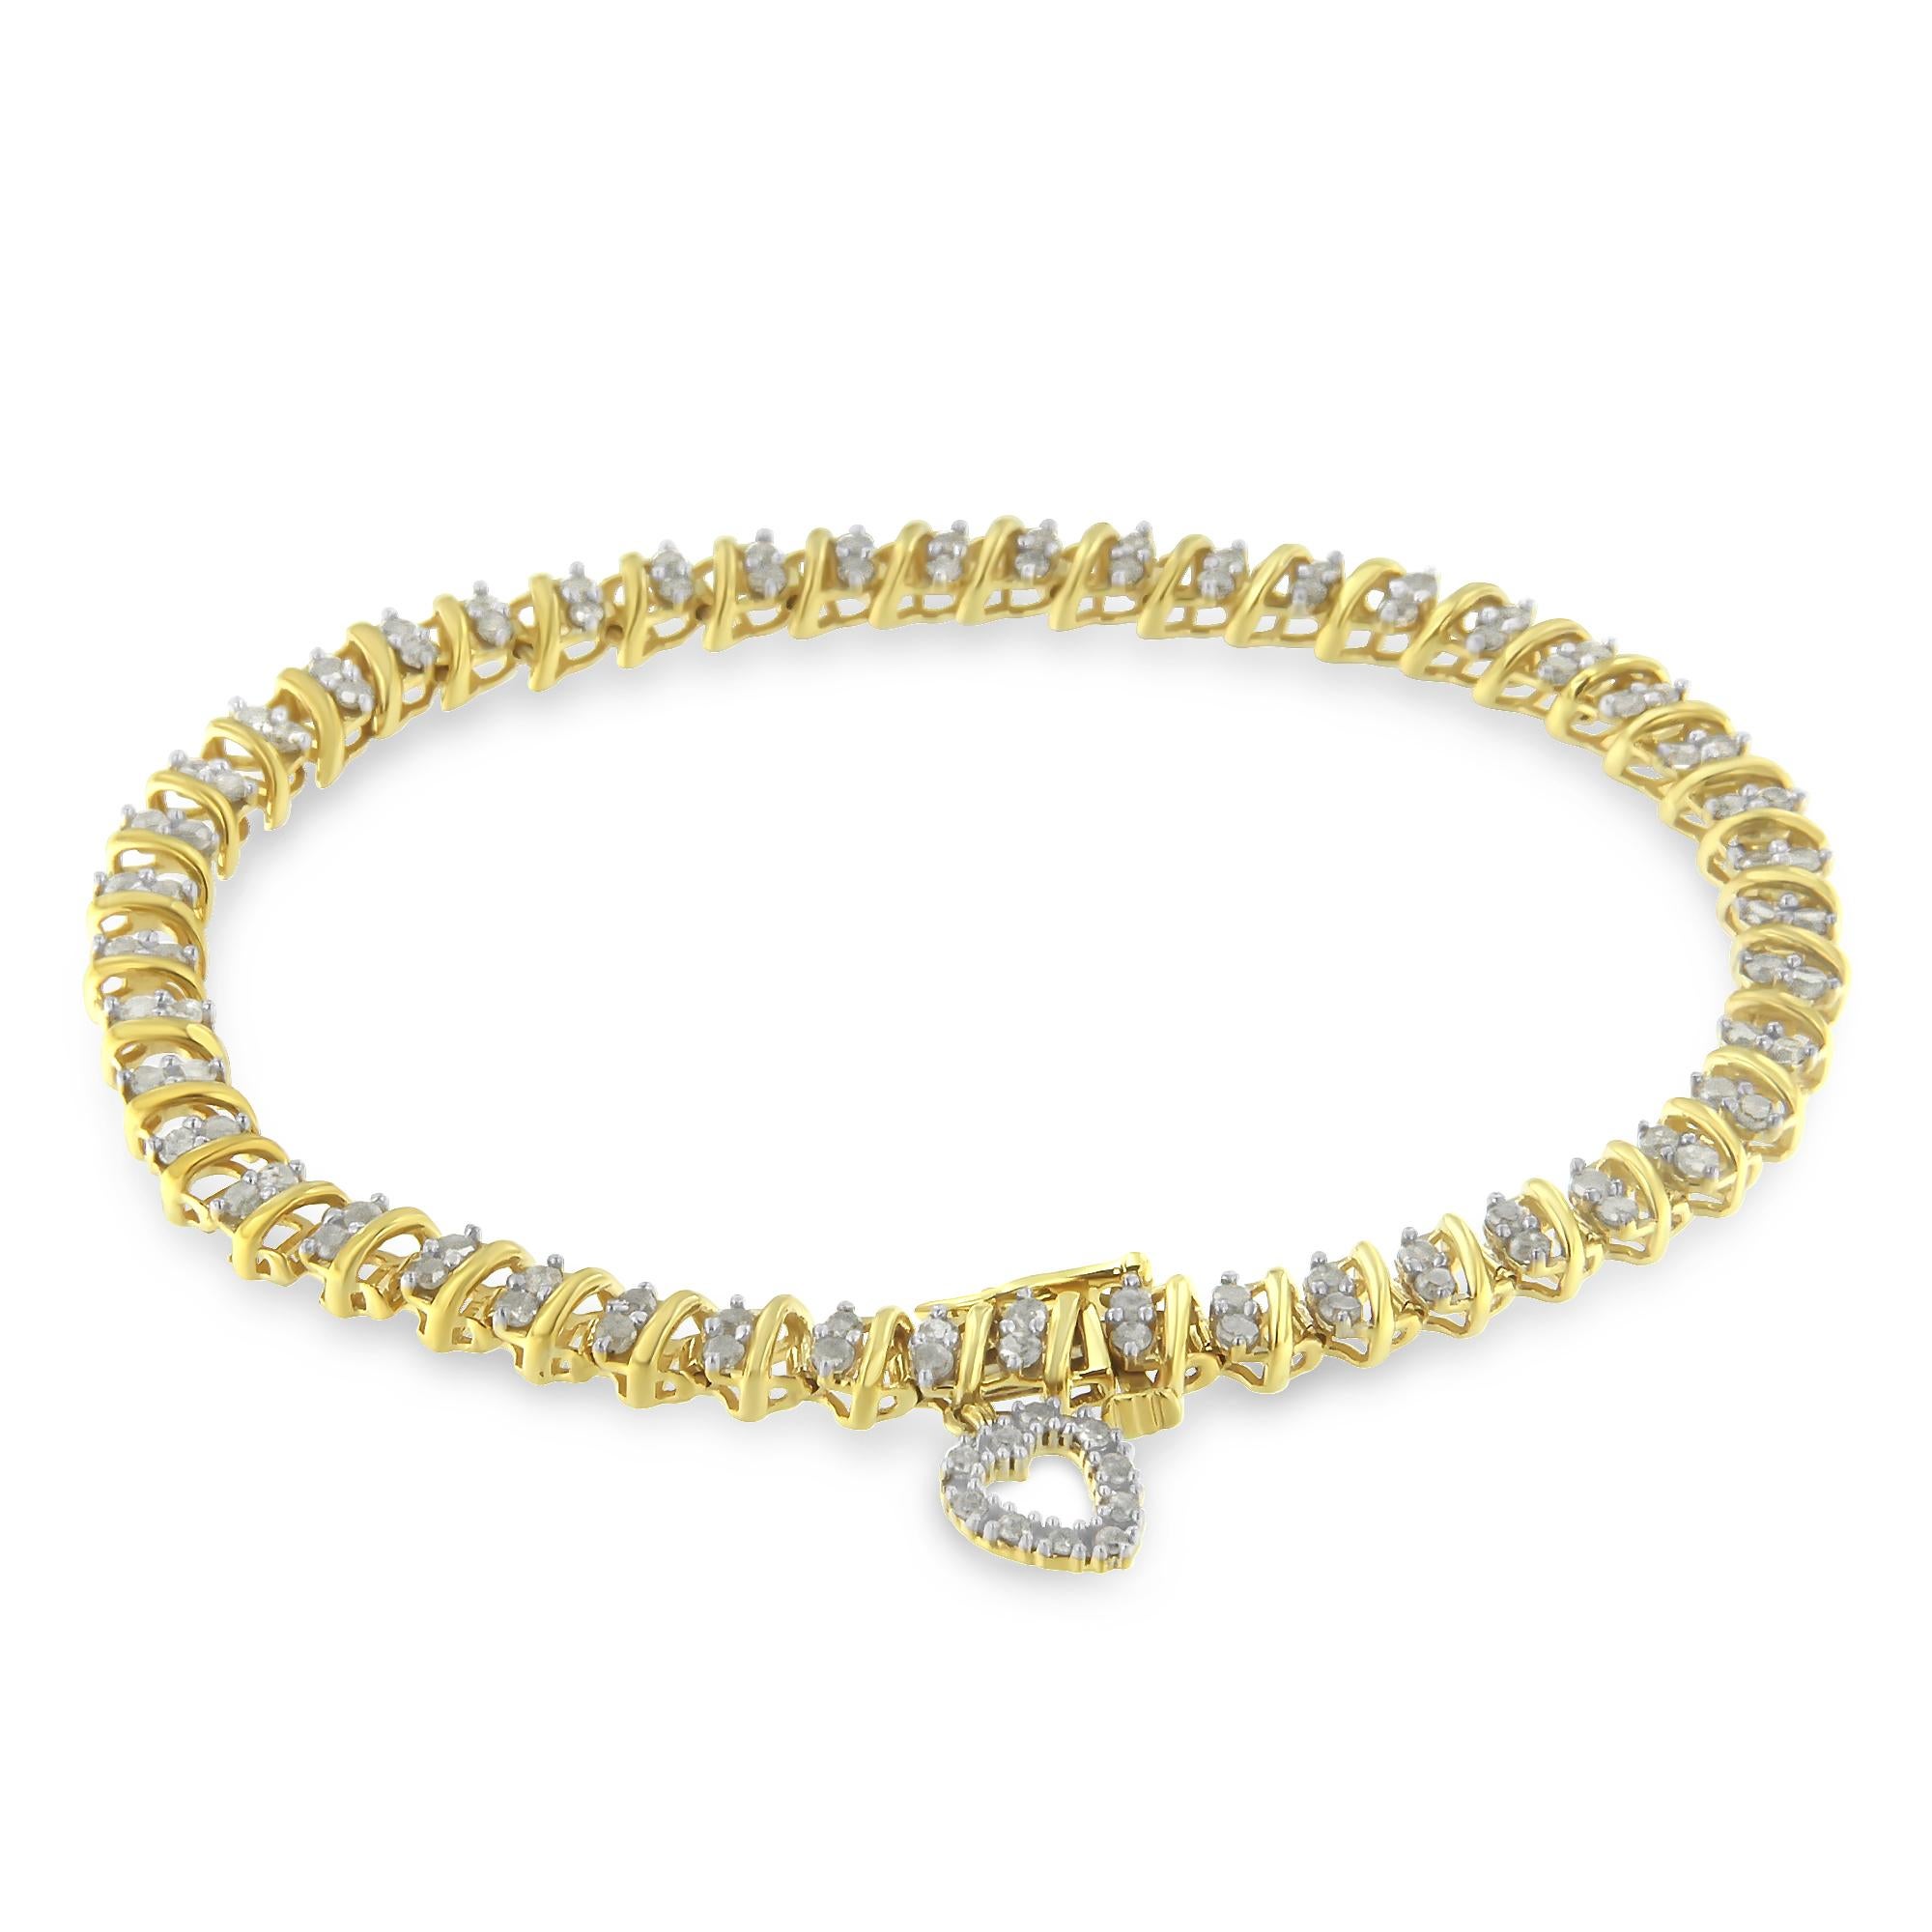 Elegant and timeless, this gorgeous 10K yellow gold coated sterling silver tennis bracelet features 2.0 carat total weight of round, rose cut, promo quality diamonds with a whopping 104 stones in all. Rose-cut, promo quality diamonds are milky and